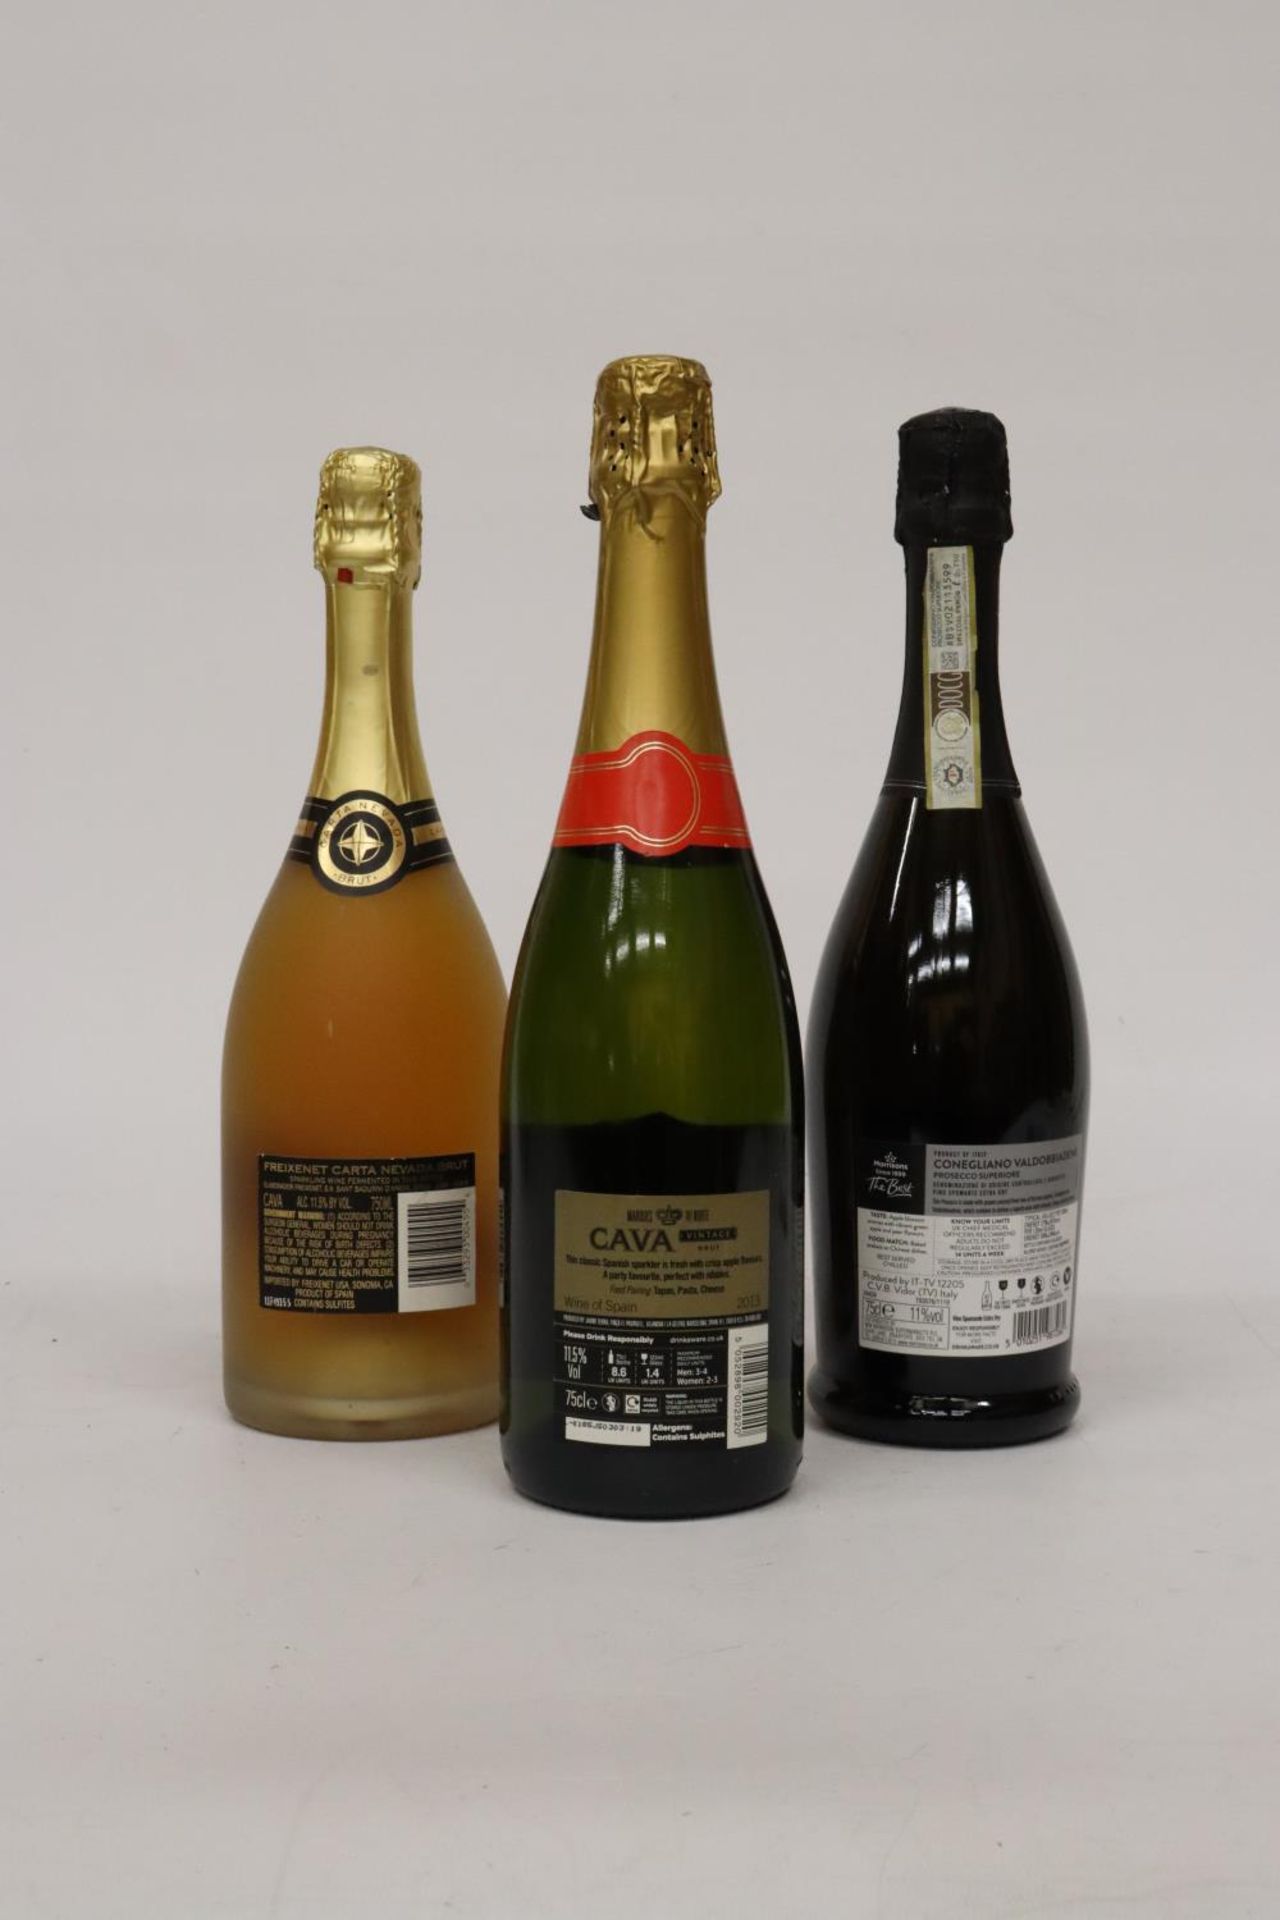 THREE 75CL BOTTLES TO INCLUDE A BOTTLE OF CAVA, A BOTTLE OF FREIXENET CARTA NEVADA BRUT AND A BOTTLE - Image 2 of 3